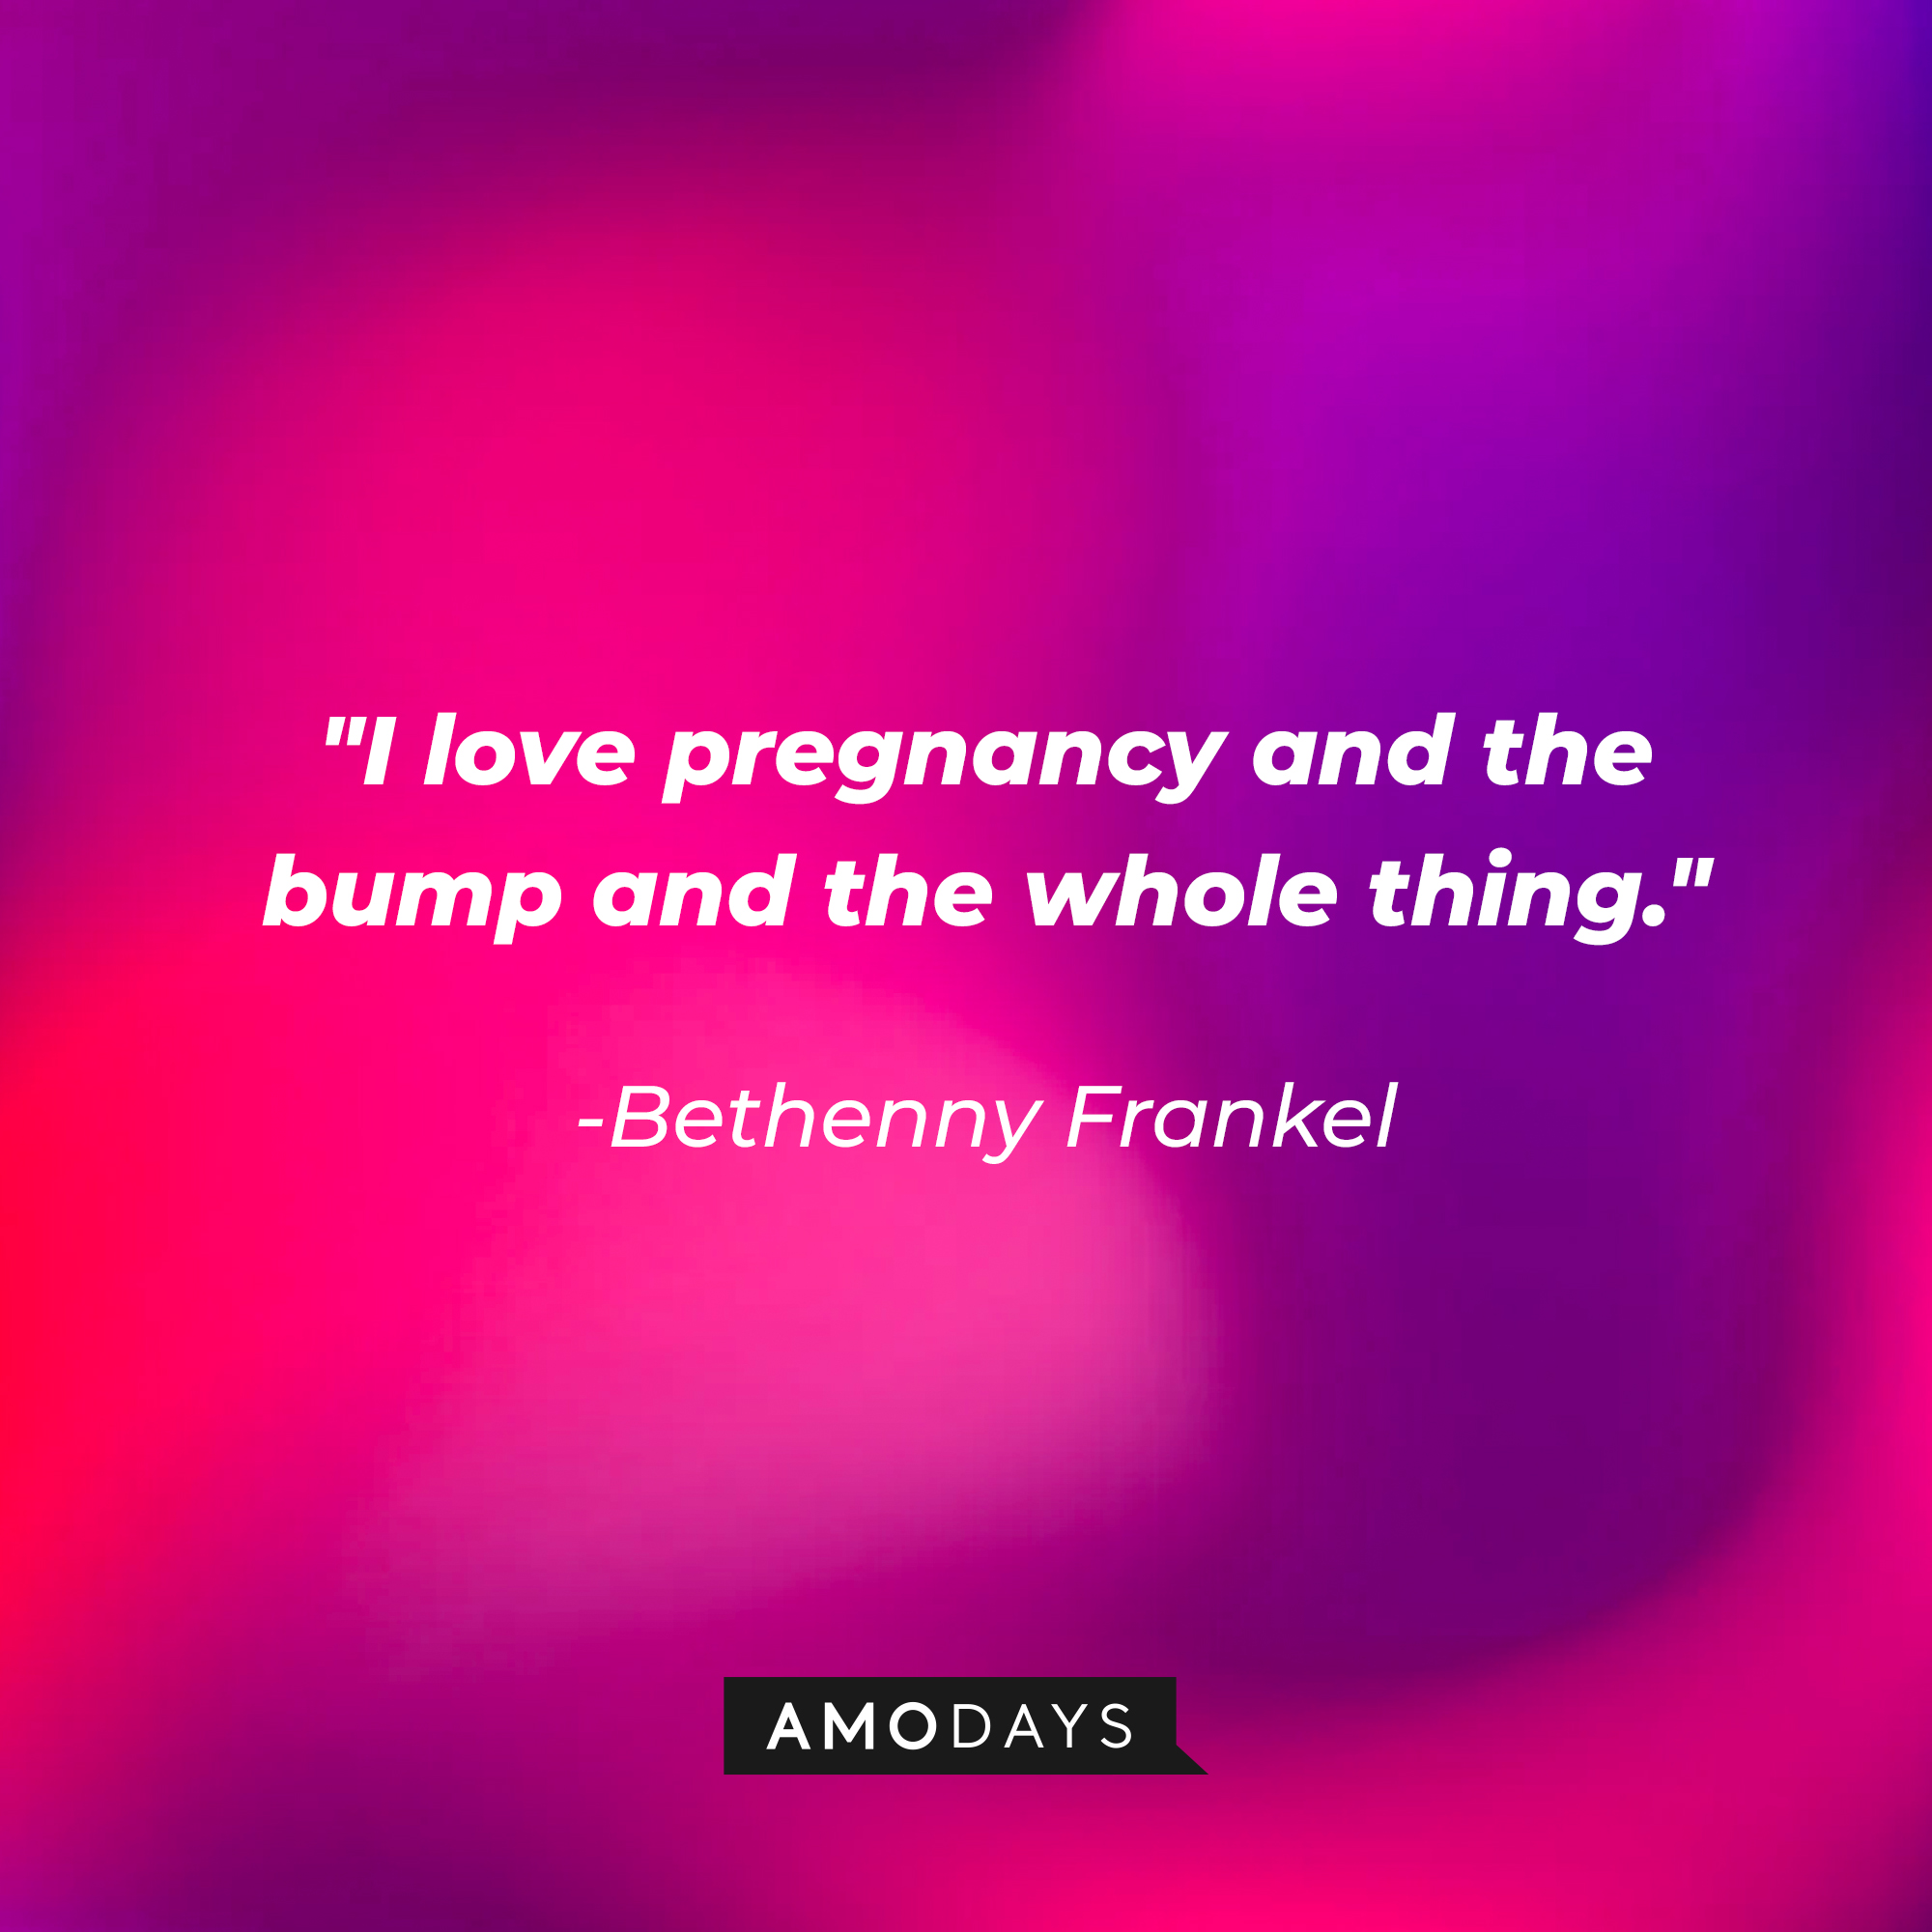 Bethenny Frankel's quote: “I love pregnancy and the bump and the whole thing." | Source: Amodays